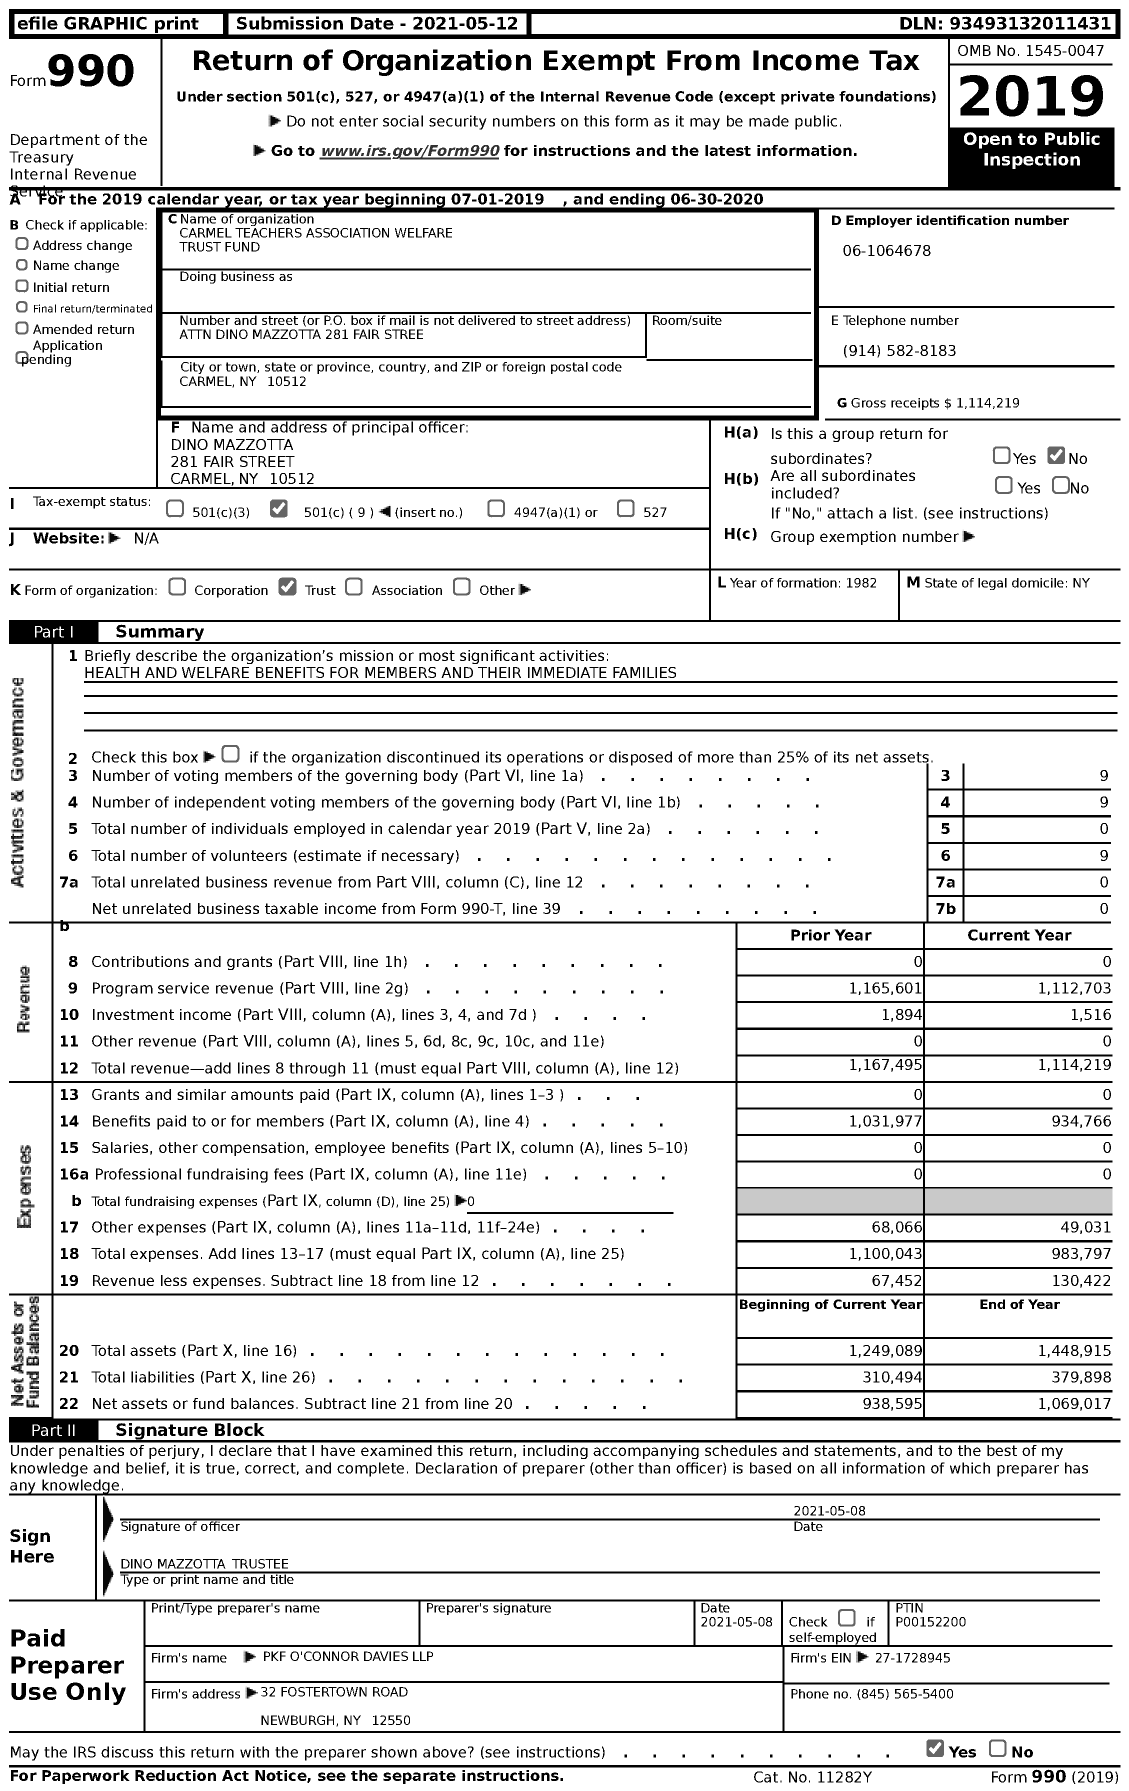 Image of first page of 2019 Form 990 for Carmel Teachers Association Welfare Trust Fund